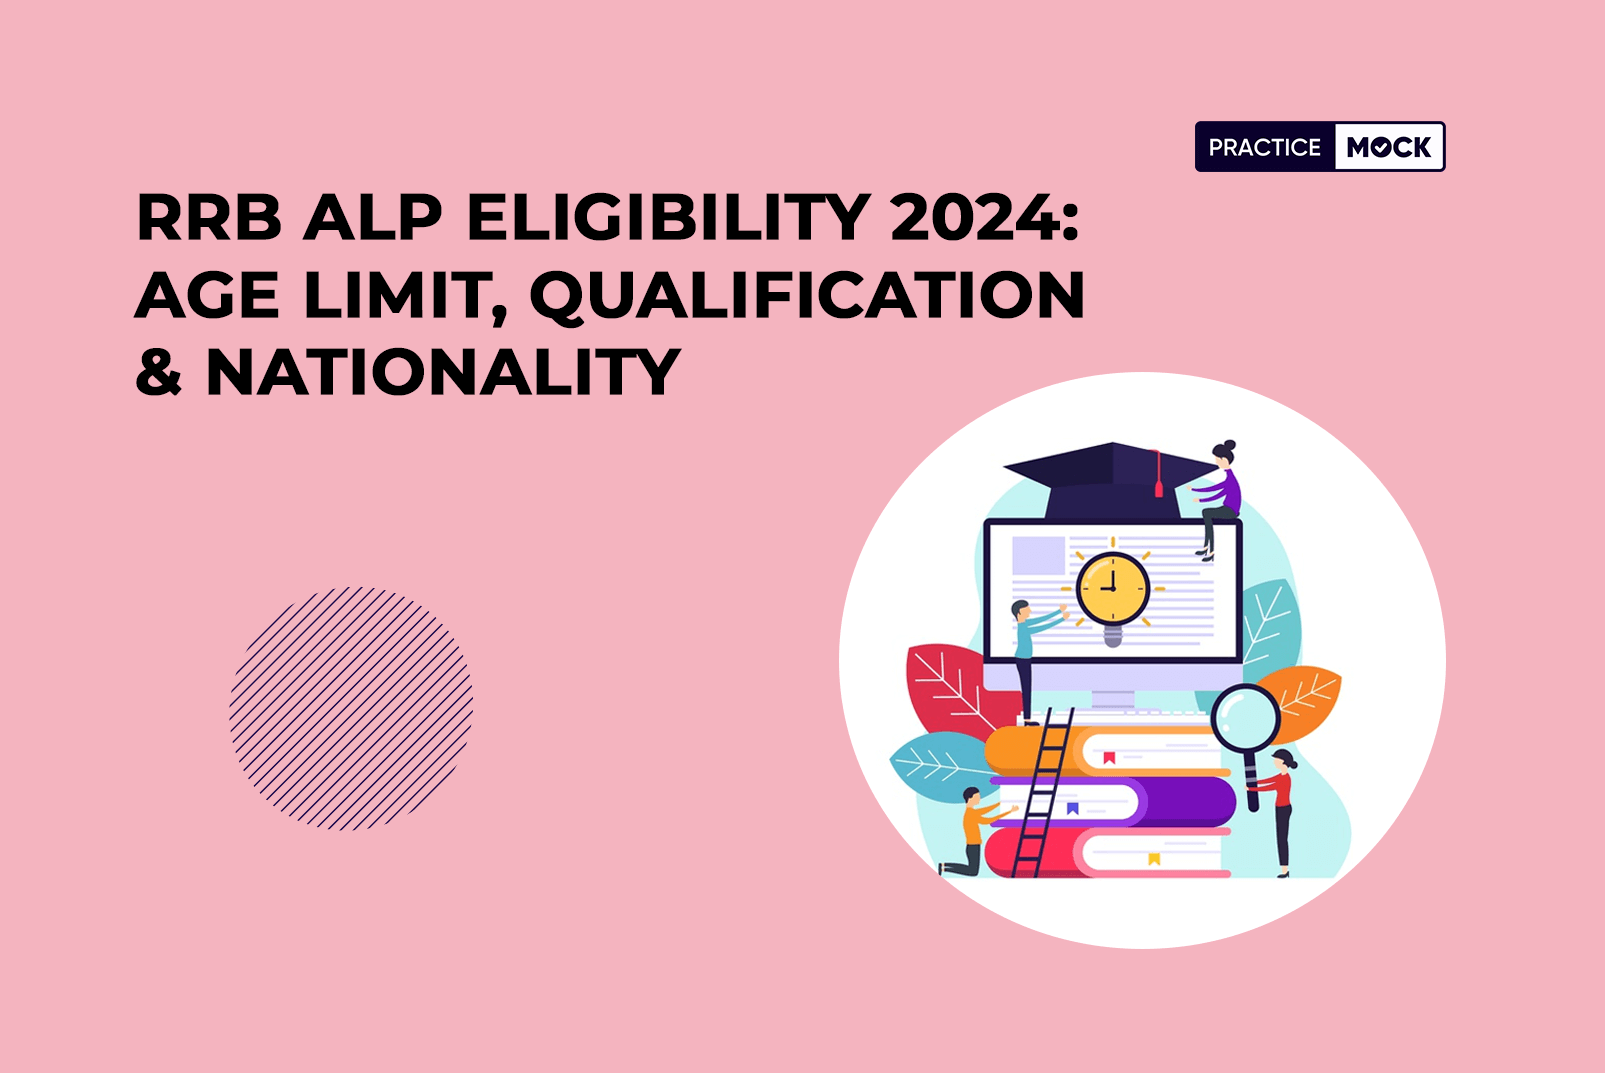 RRB ALP Eligibility 2024 Age Limit, Qualification & Nationality